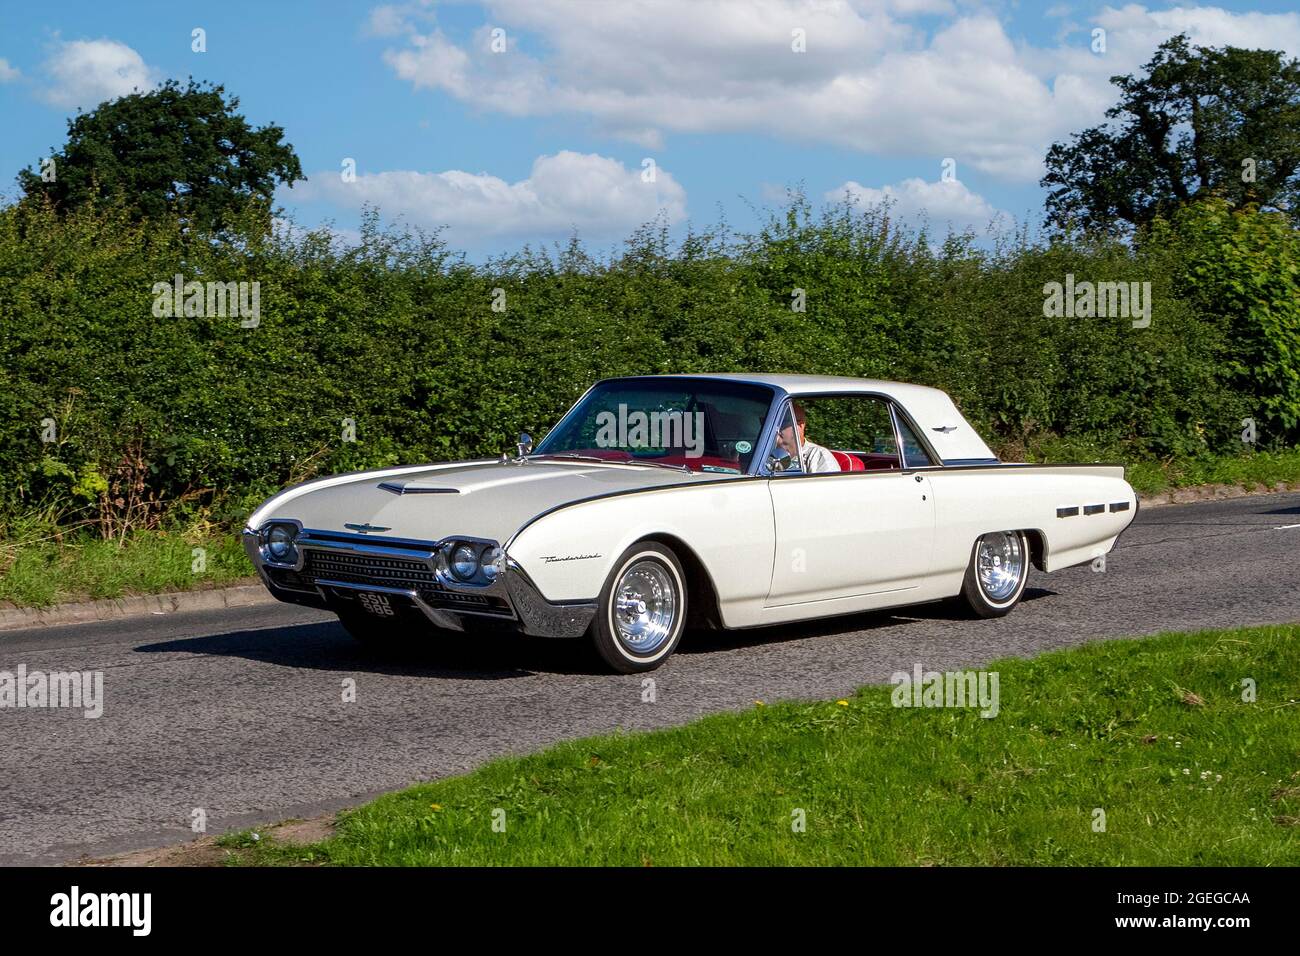 A front view of 1960s American Classic Ford Thunderbird Jet age vintage classic car retro driver vehicle automobile Stock Photo